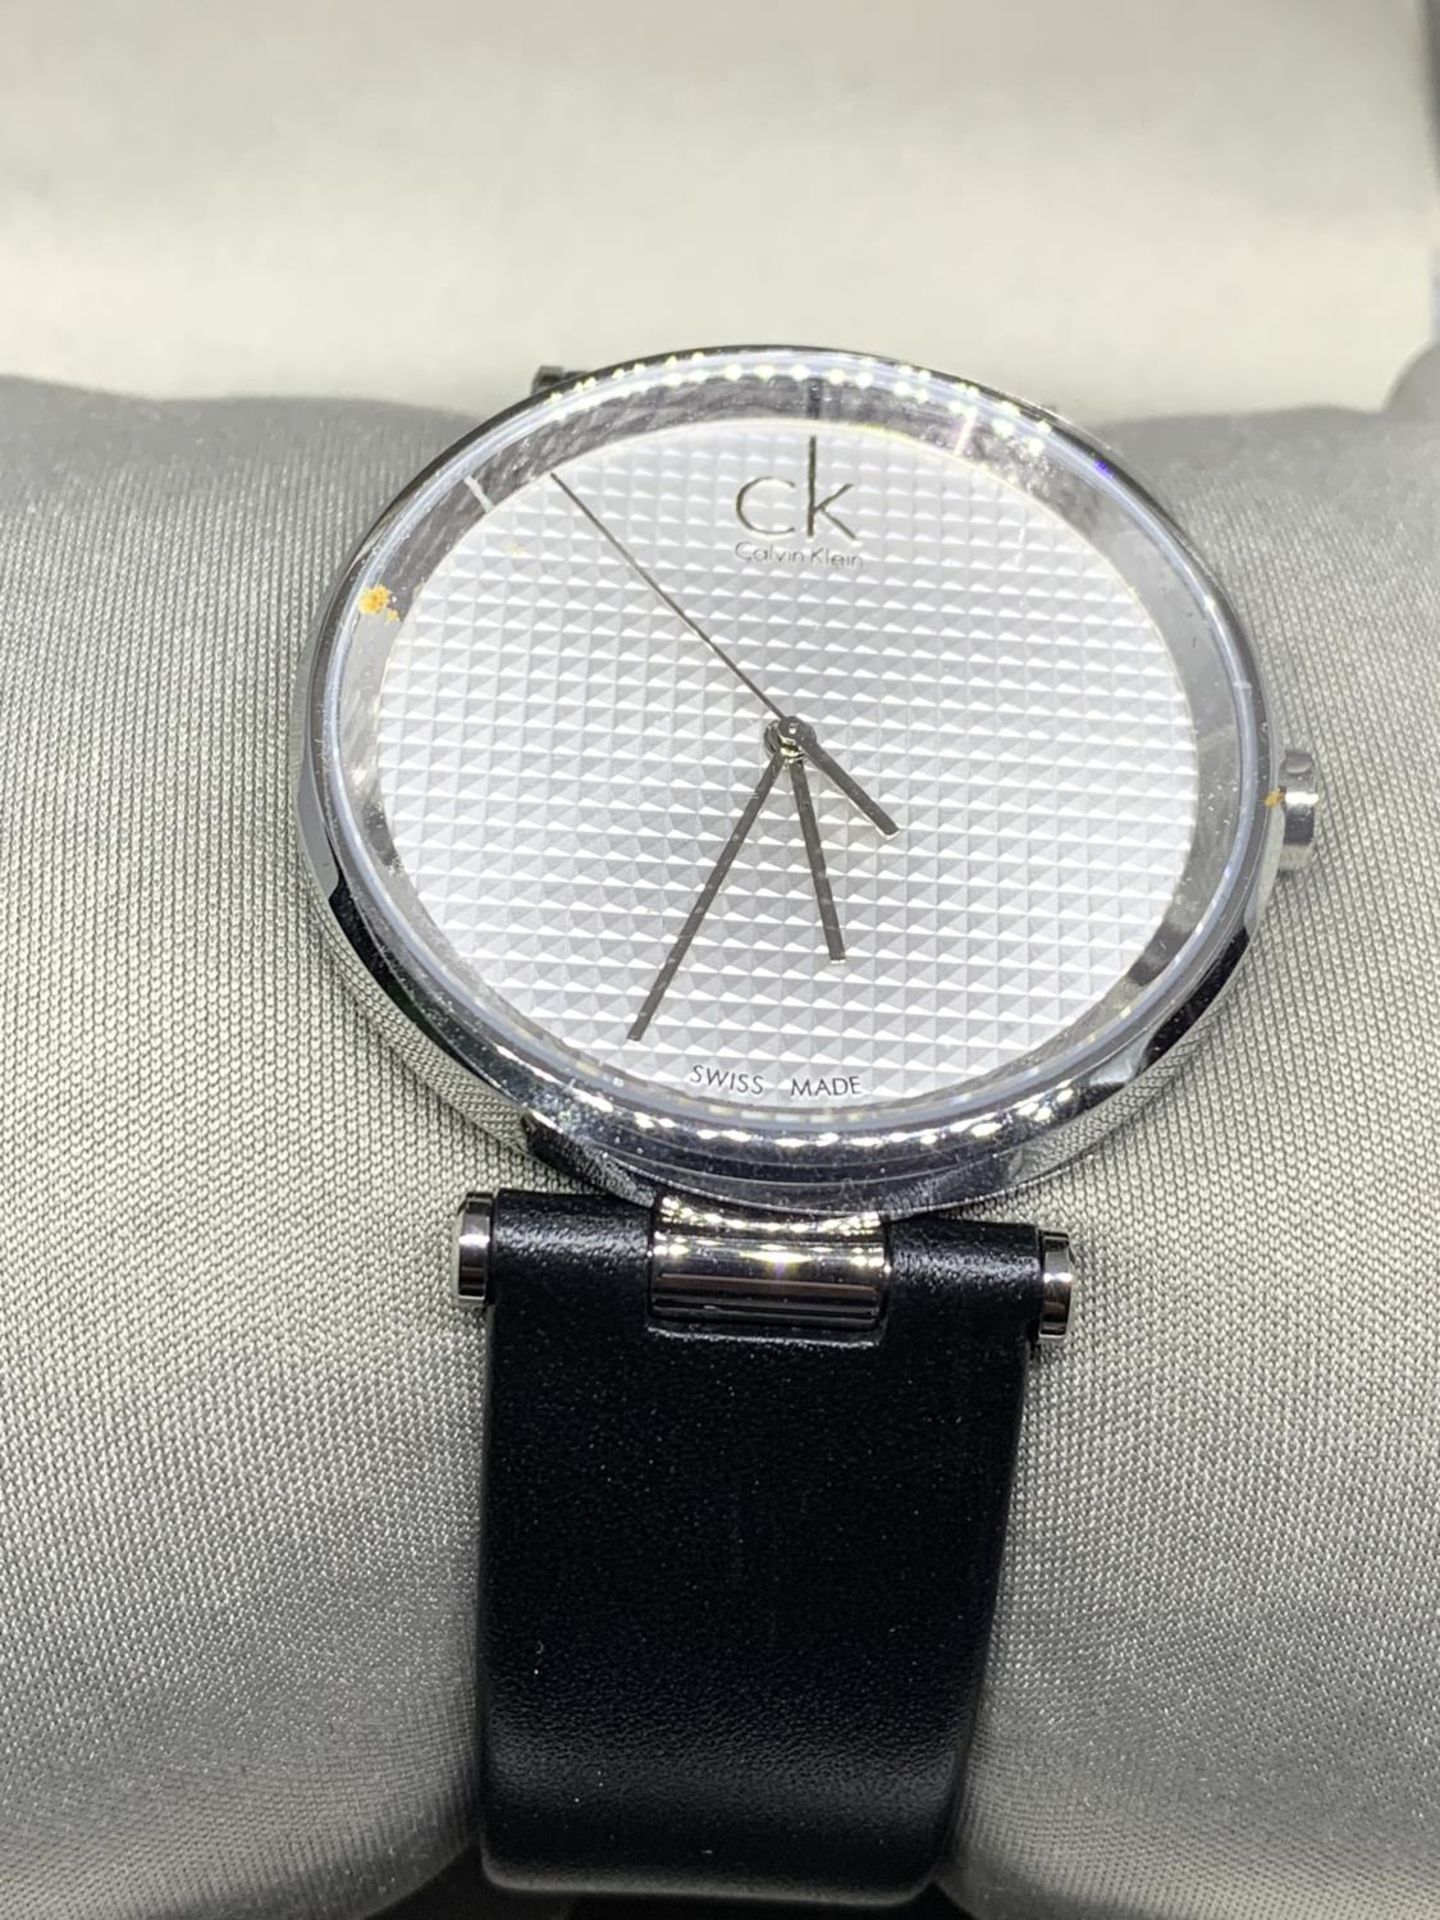 AN AS NEW AND BOXED CALVIN KLEIN CALENDER WRIST WATCH IN WORKING ORDER - Image 2 of 5